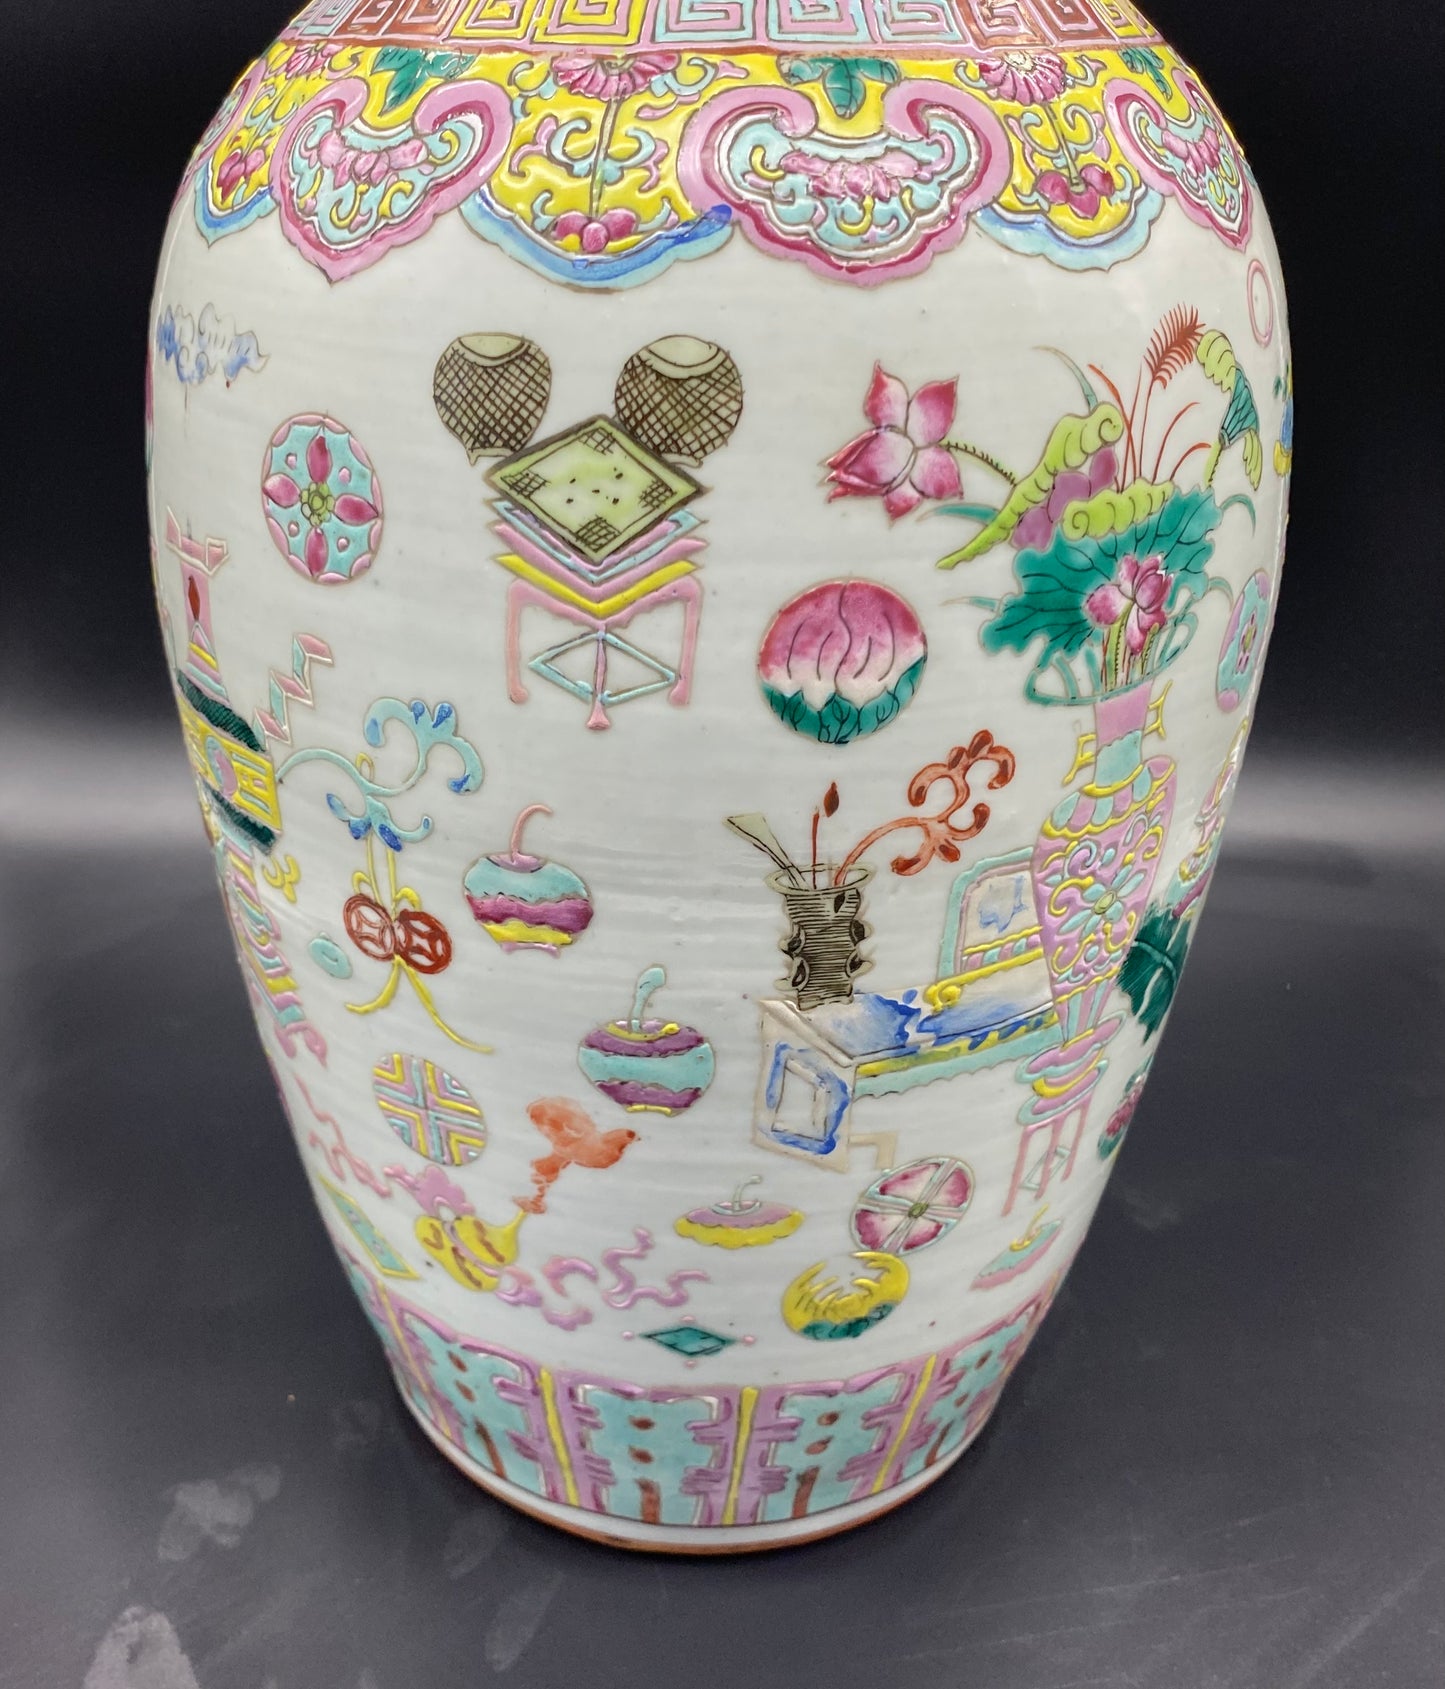 Large Chinese famille rose decorated vase very well painted with brightly Coloured Enamels, scholars object and flower ball decoration. KB Antiques & Watches Online